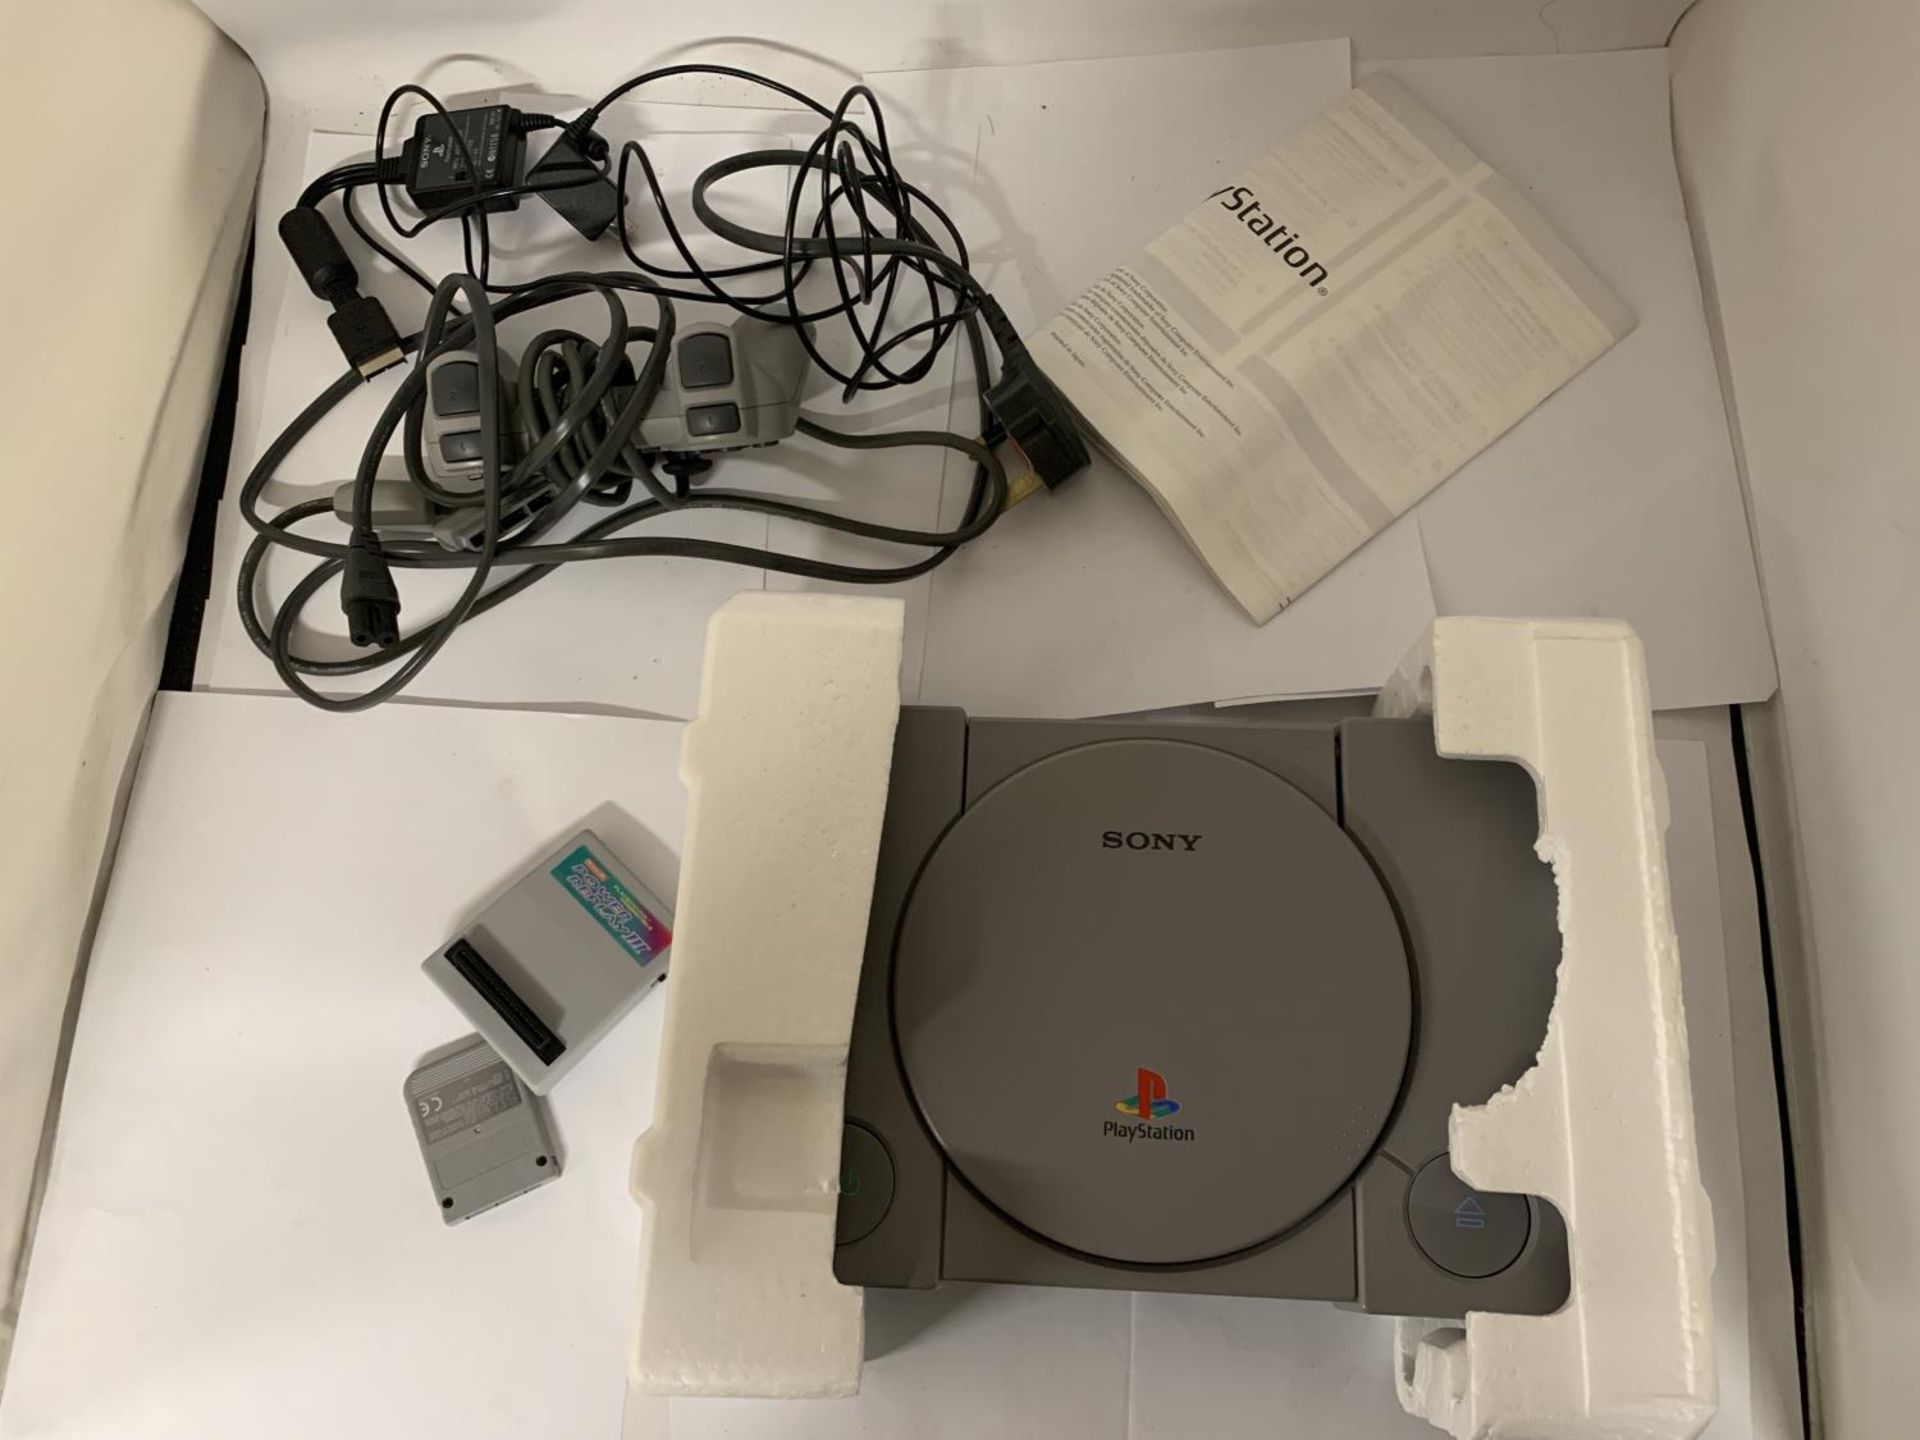 A BOXED PLAYSTATION ONE TOGETHER WITH DUAL SHOCK CONTROLLER - Image 2 of 4